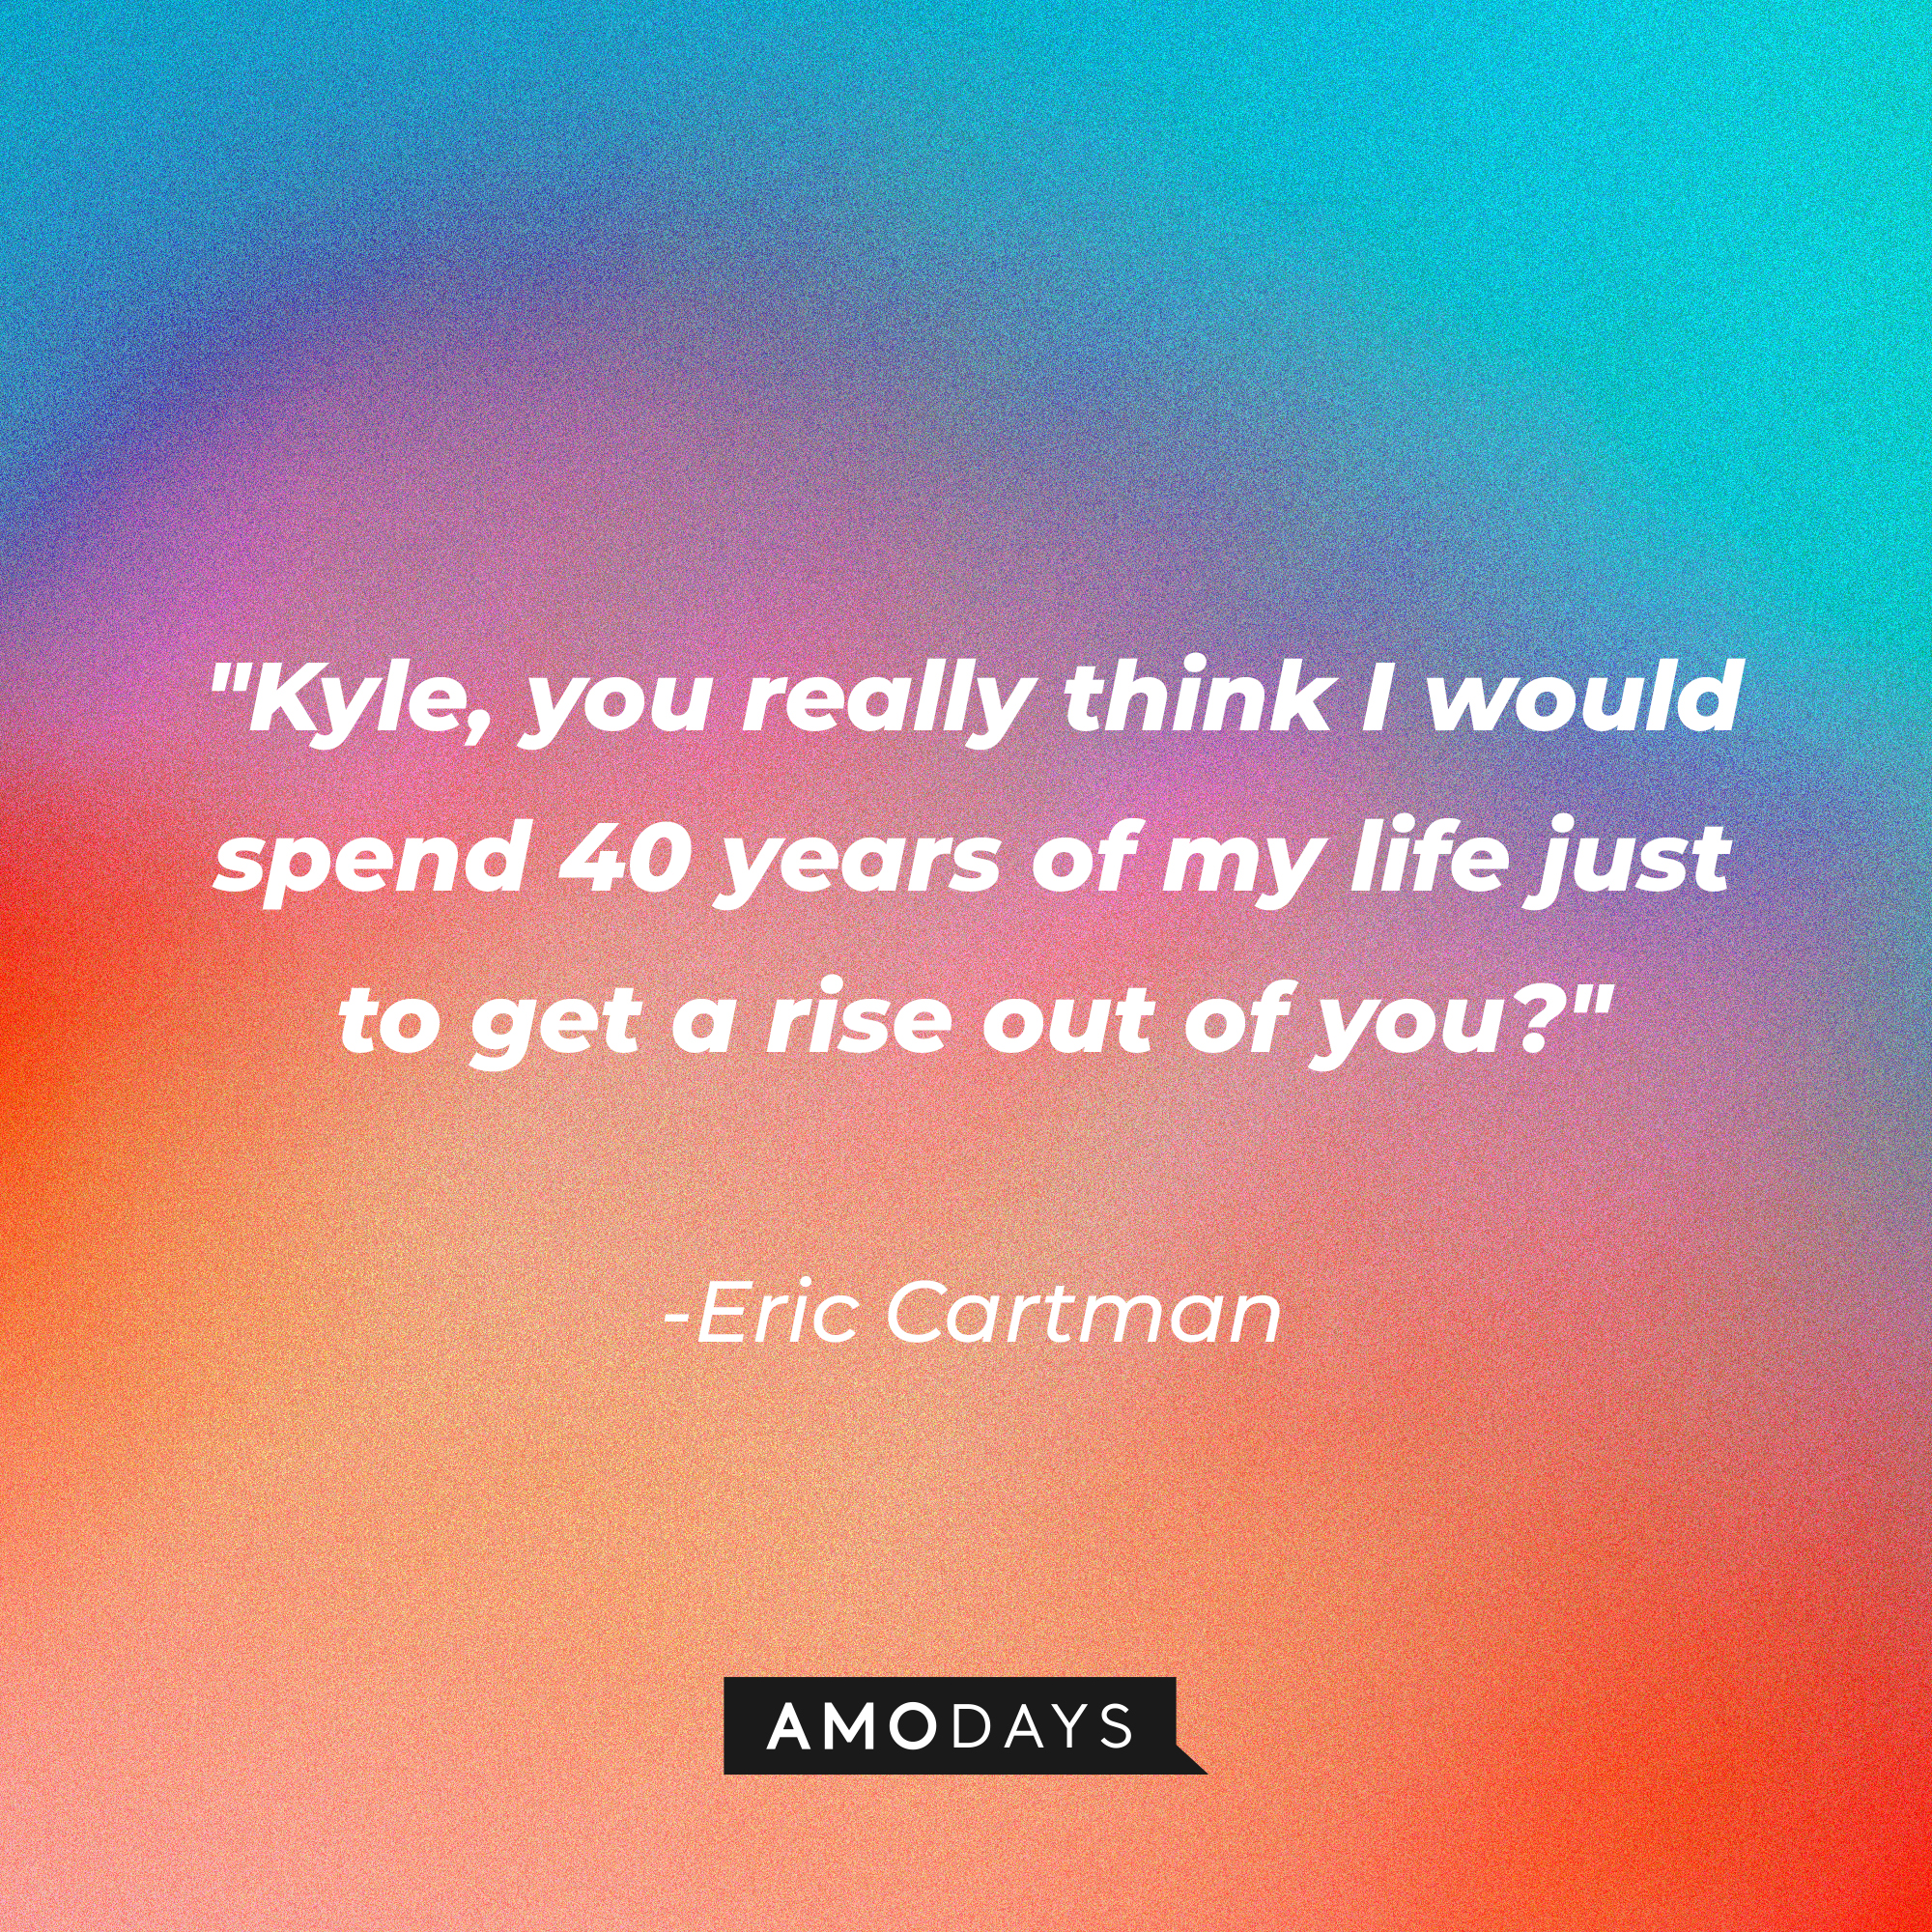 Eric Cartman's quote: "Kyle, you really think I would spend 40 years of my life just to get a rise out of you?" | Source: AmoDays